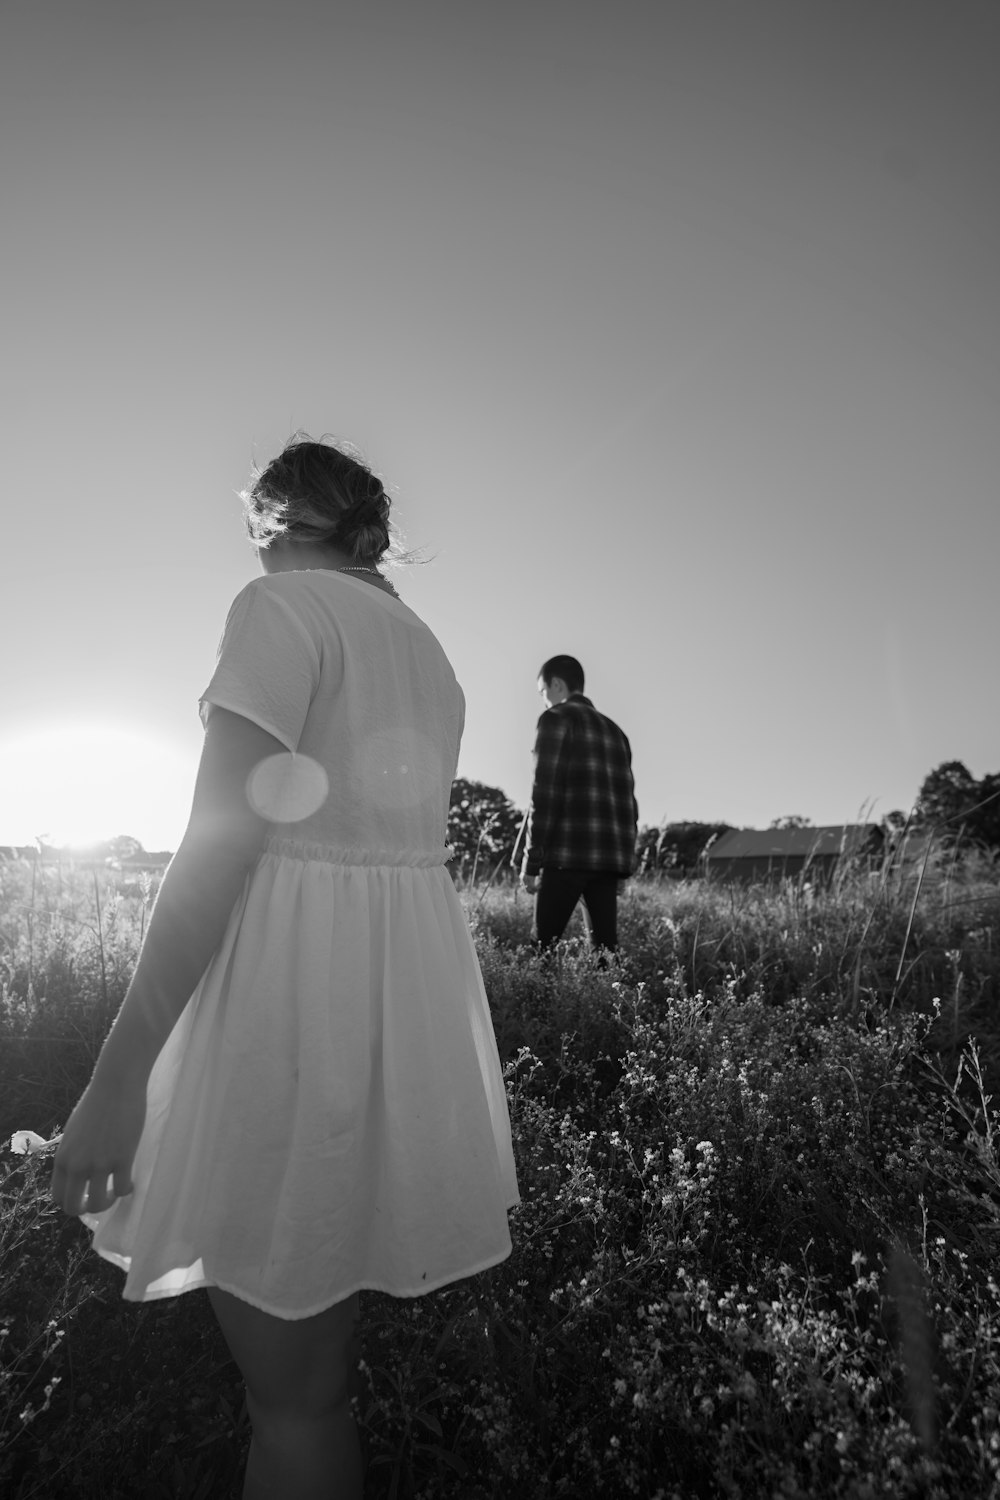 grayscale photo of couple walking on grass field